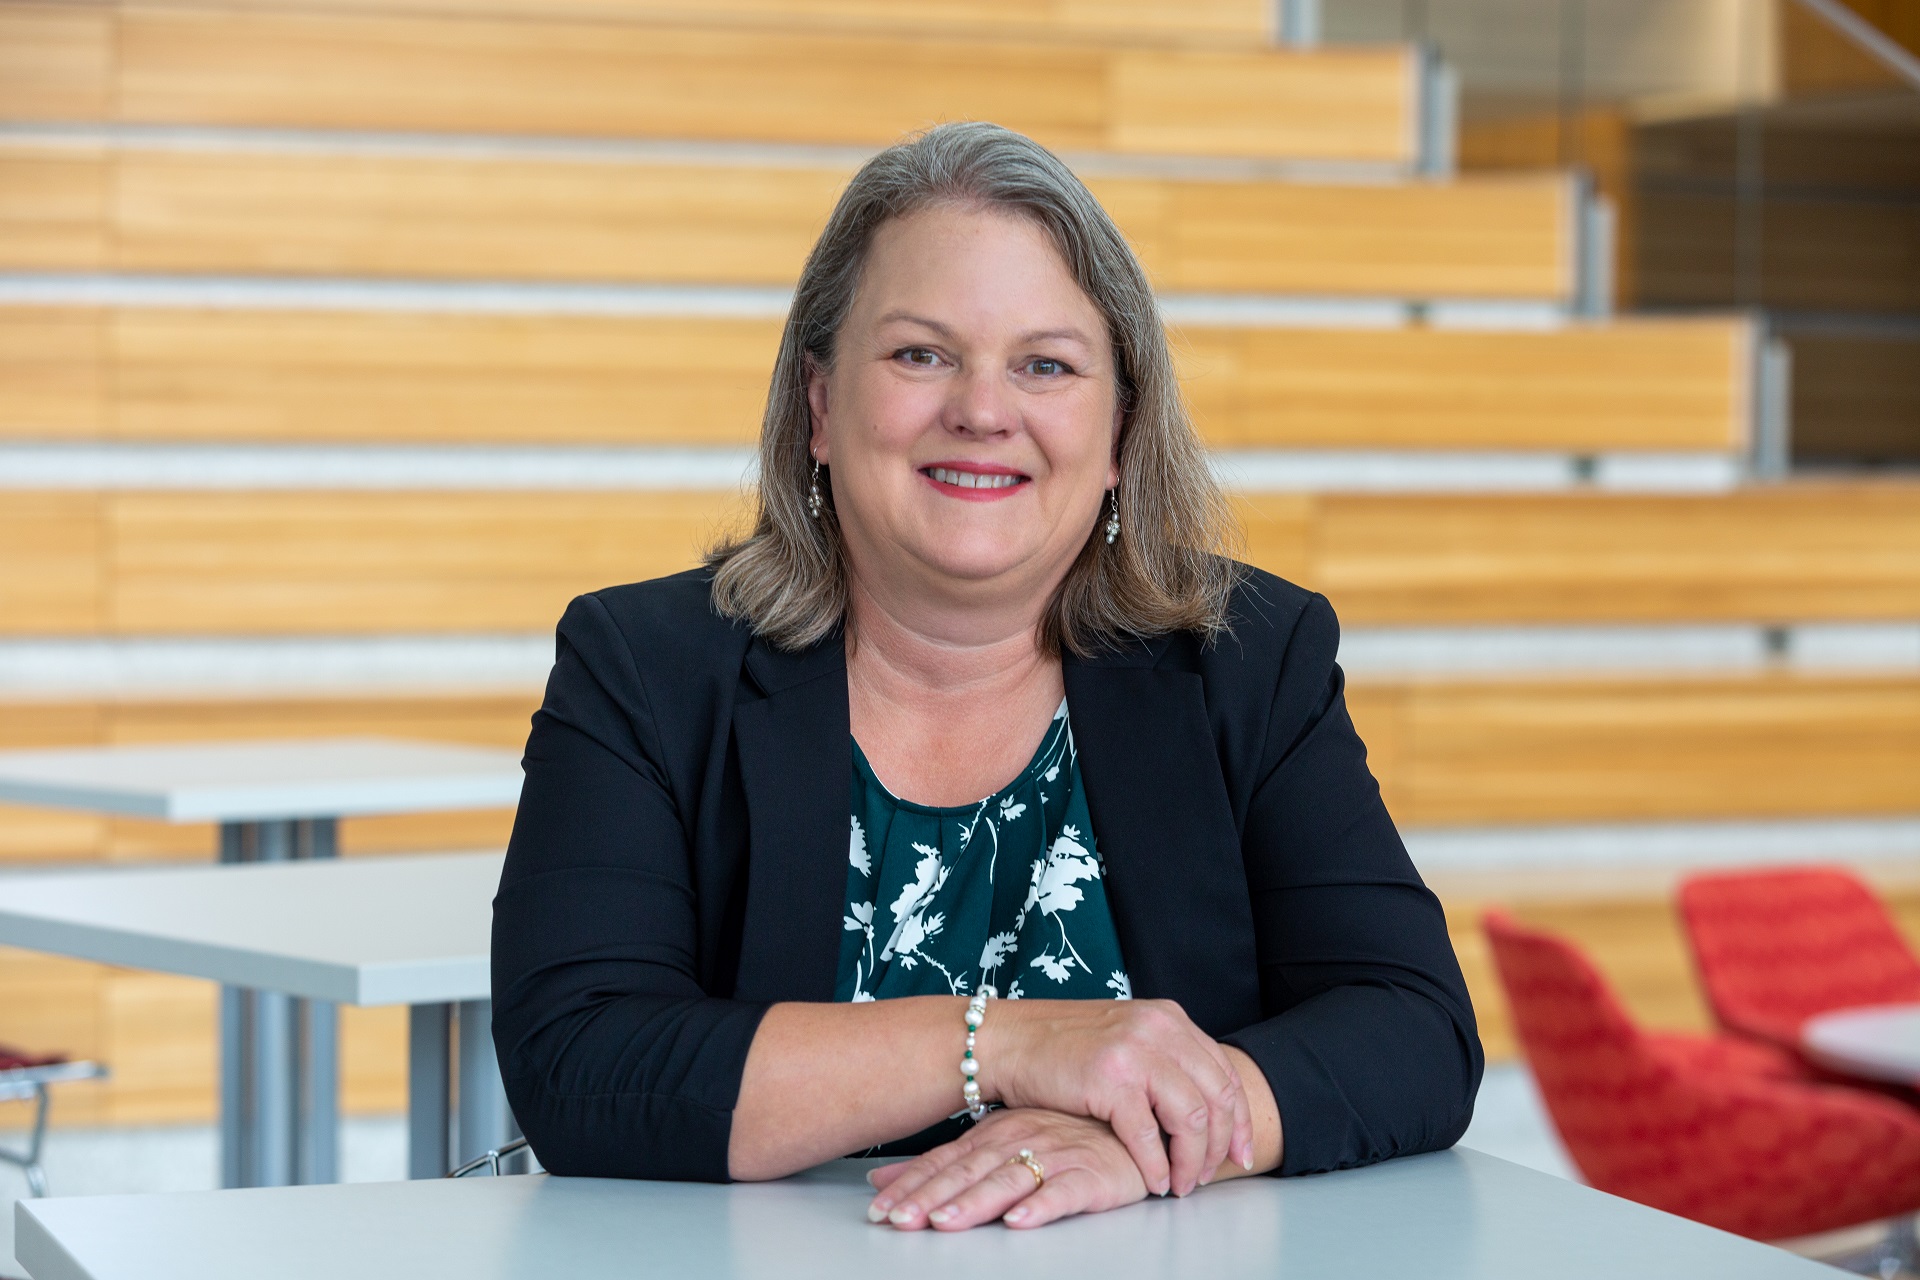 The Broad College of Business selects Judith Whipple, who has served as the faculty director of the college's M.S. in Supply Chain Management since 2018, to serve as interim dean designee.